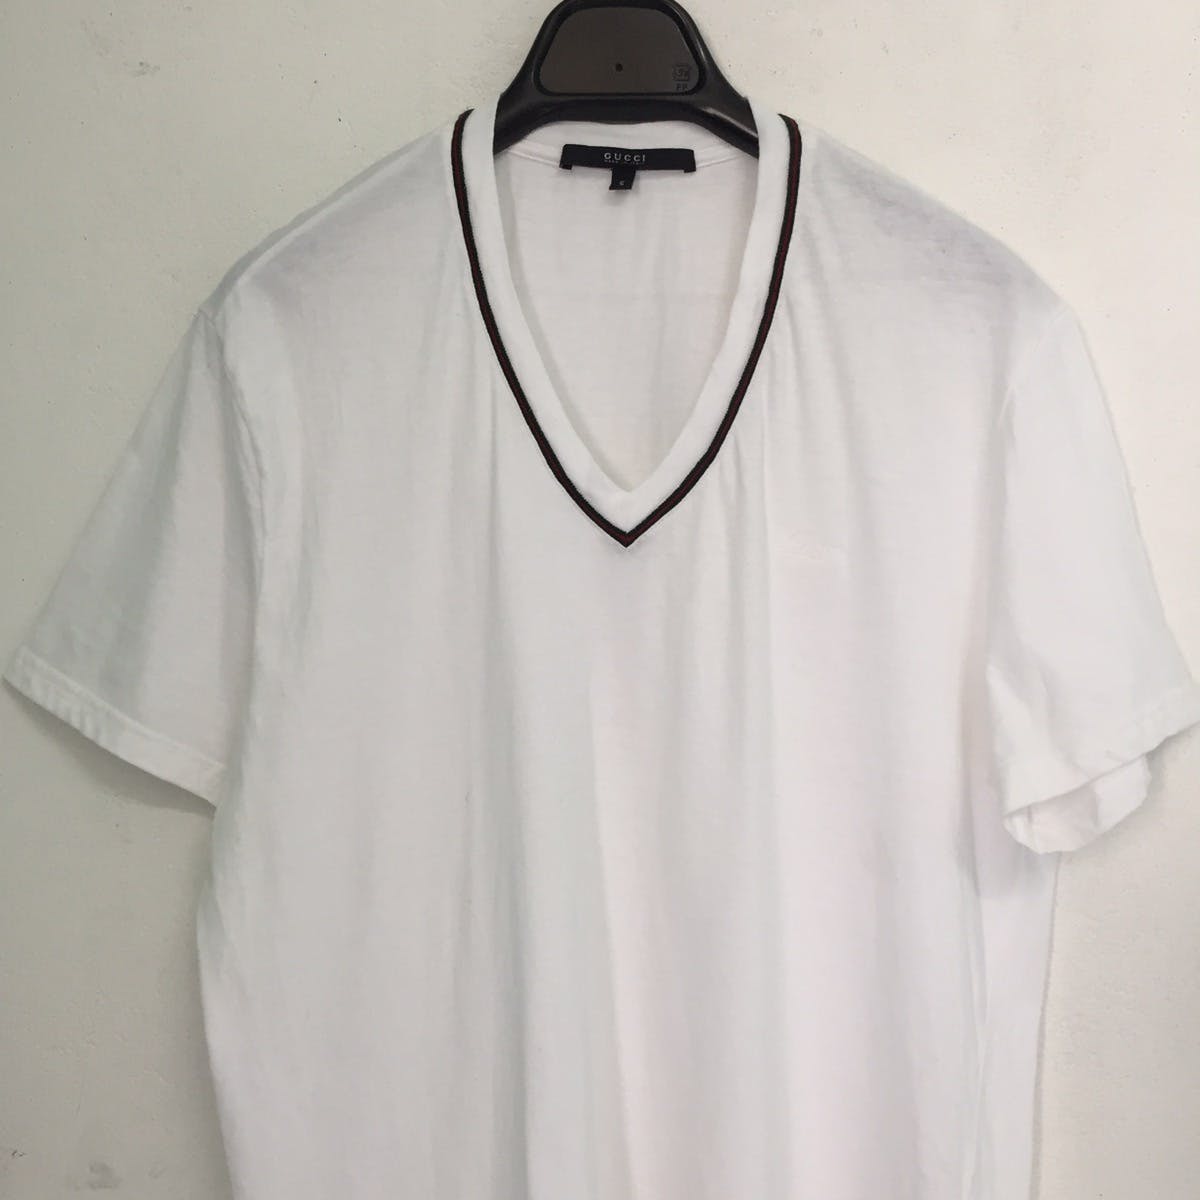 Gucci White Tee V Neck MADE IN ITALY - 4